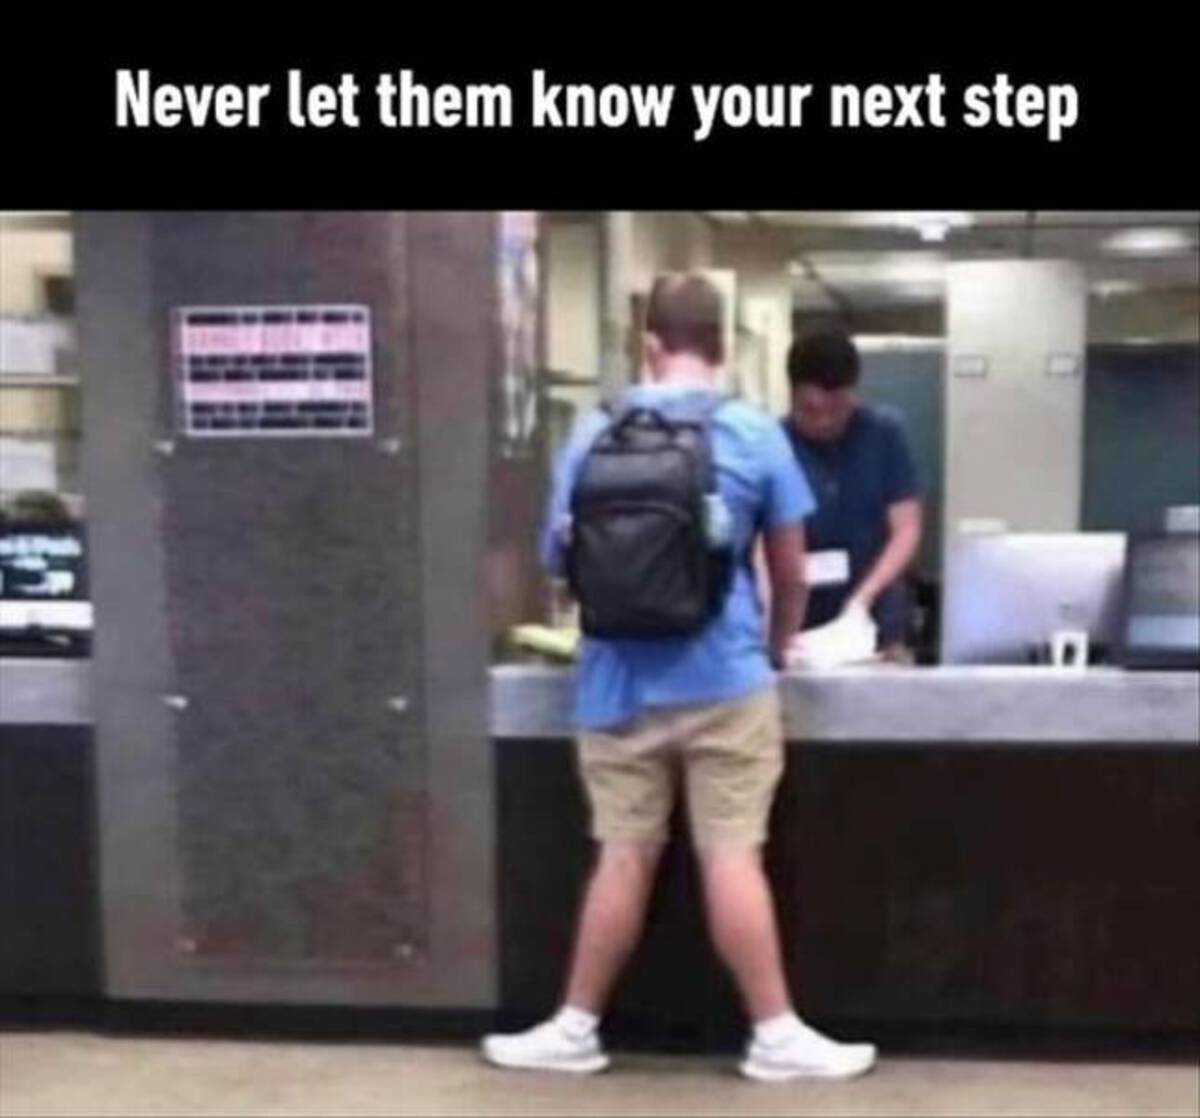 Never let them know your next step